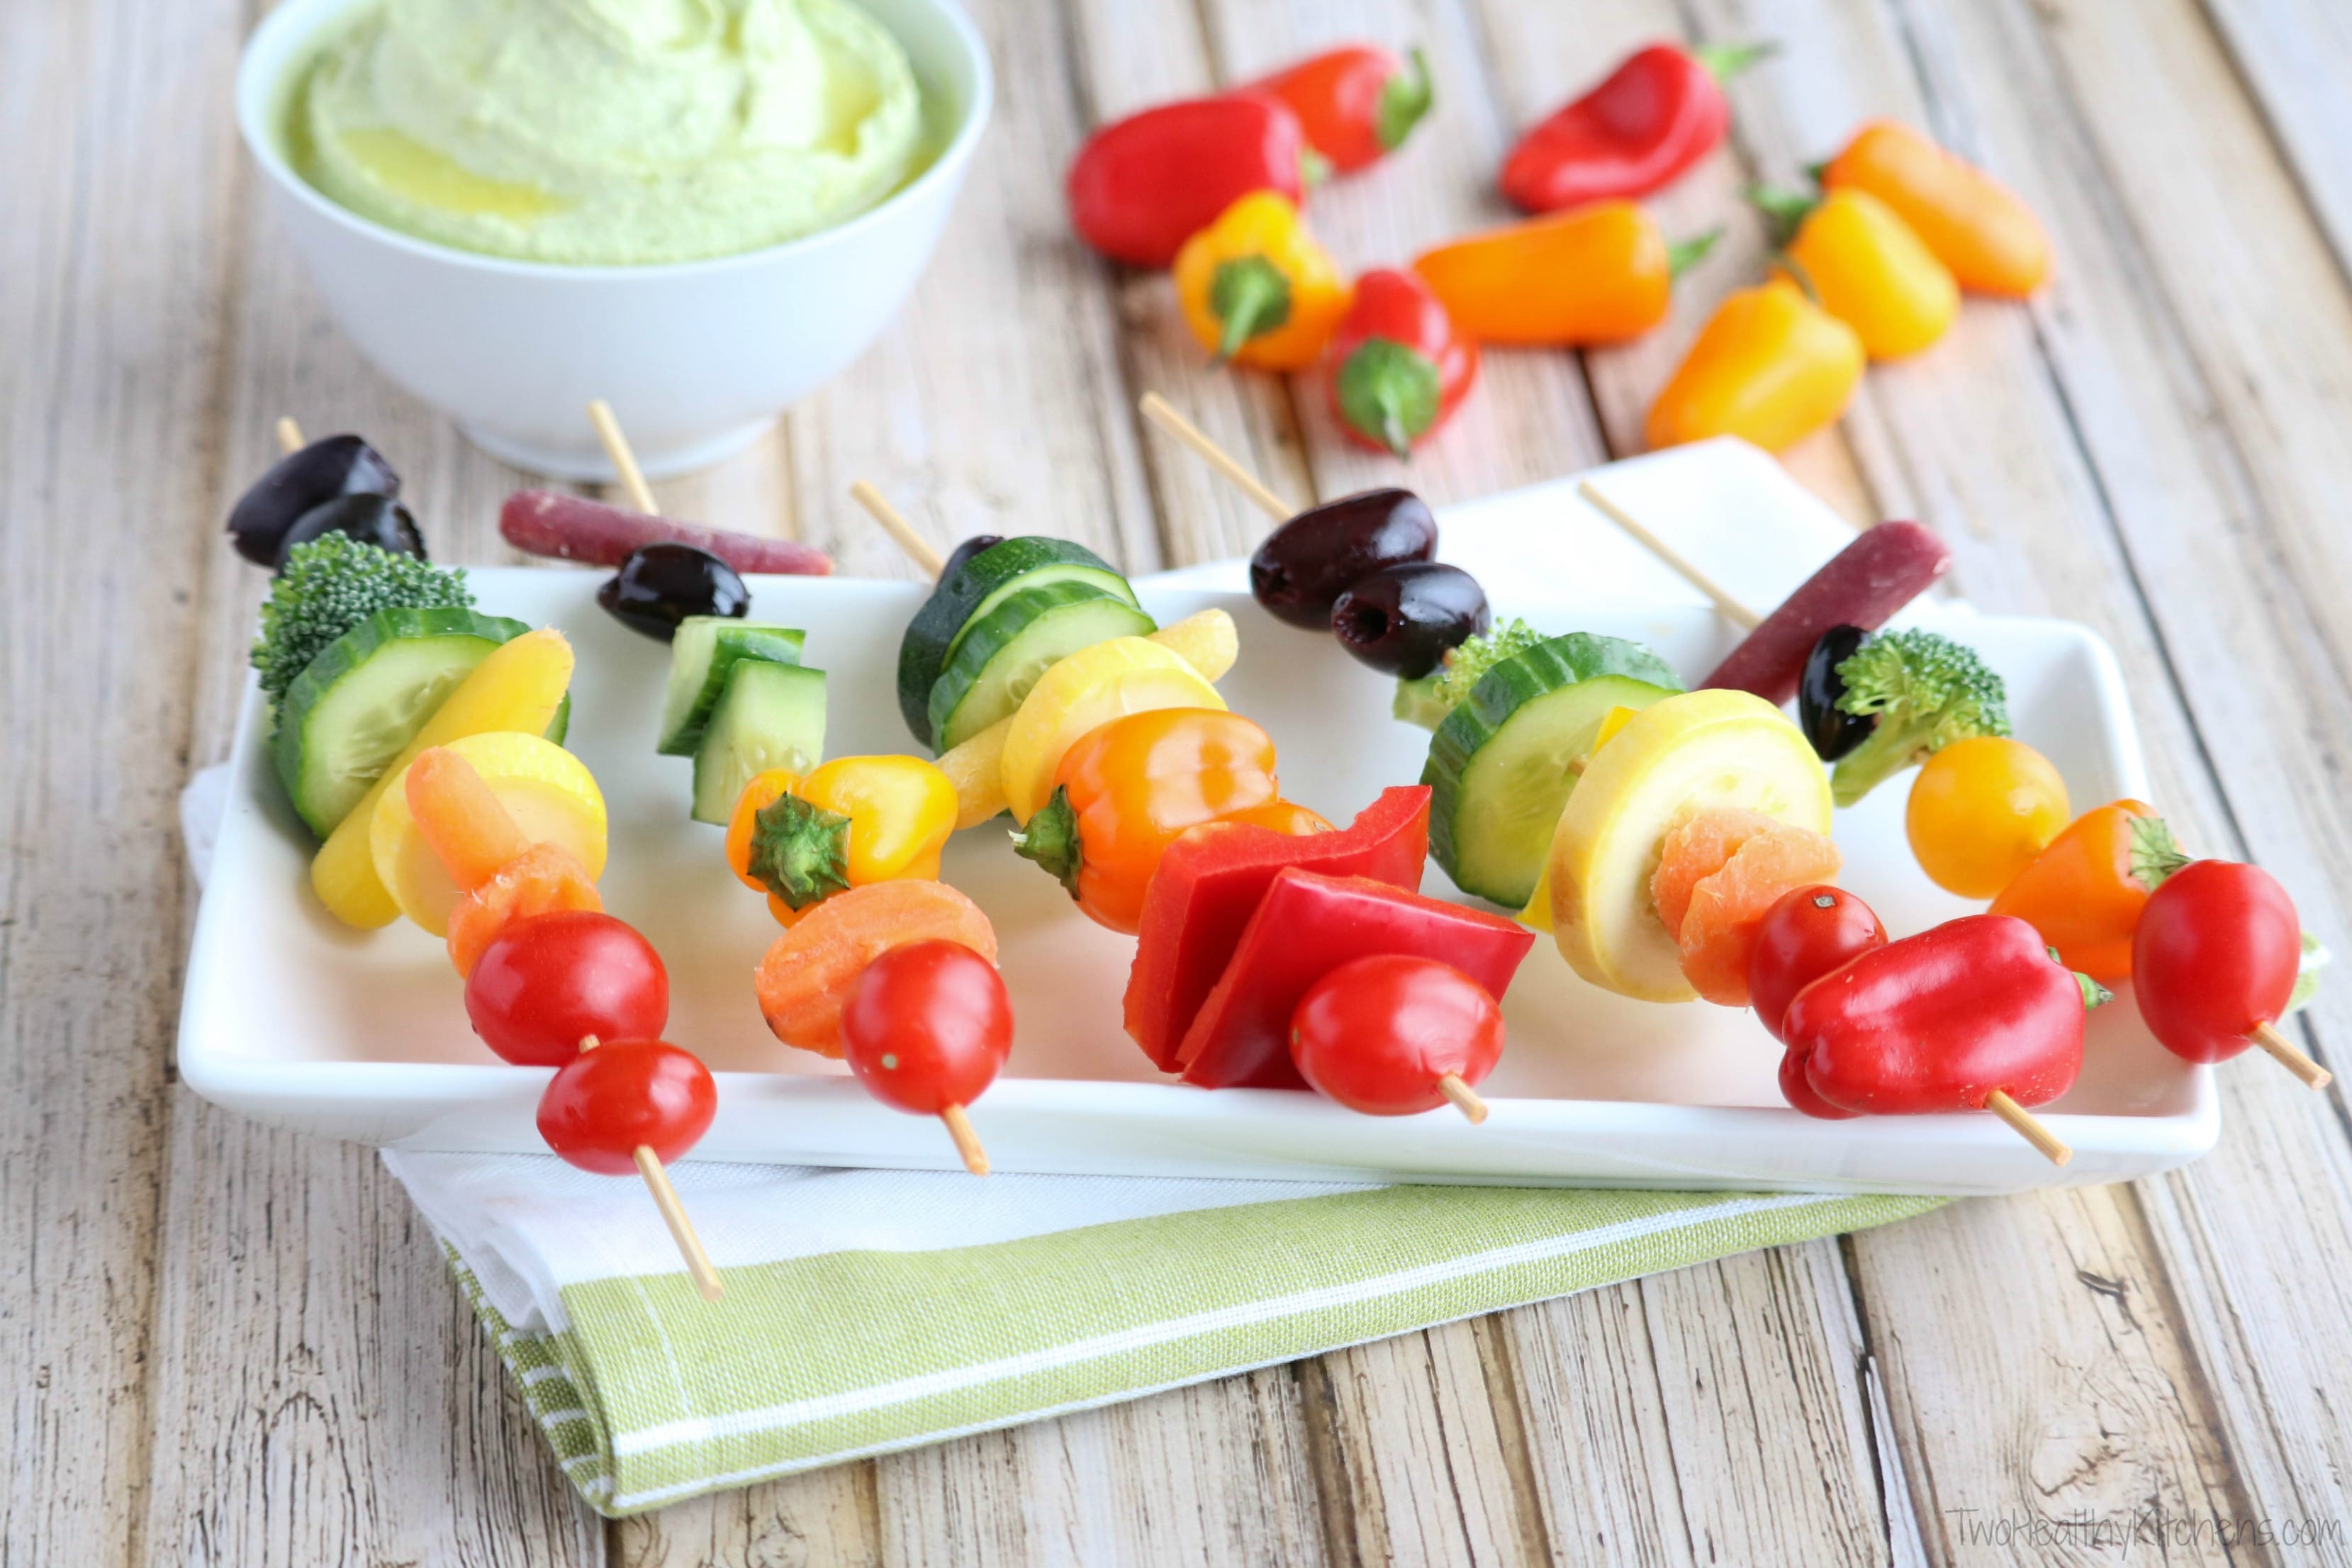 These Rainbow Veggie Kabobs are so much more fun than veggies and dip on that plain-old veggie tray! Perfect for picnics and parties! And a great way to inspire kids to eat more veggies - they’ll love creating their own! | www.TwoHealthyKitchens.com